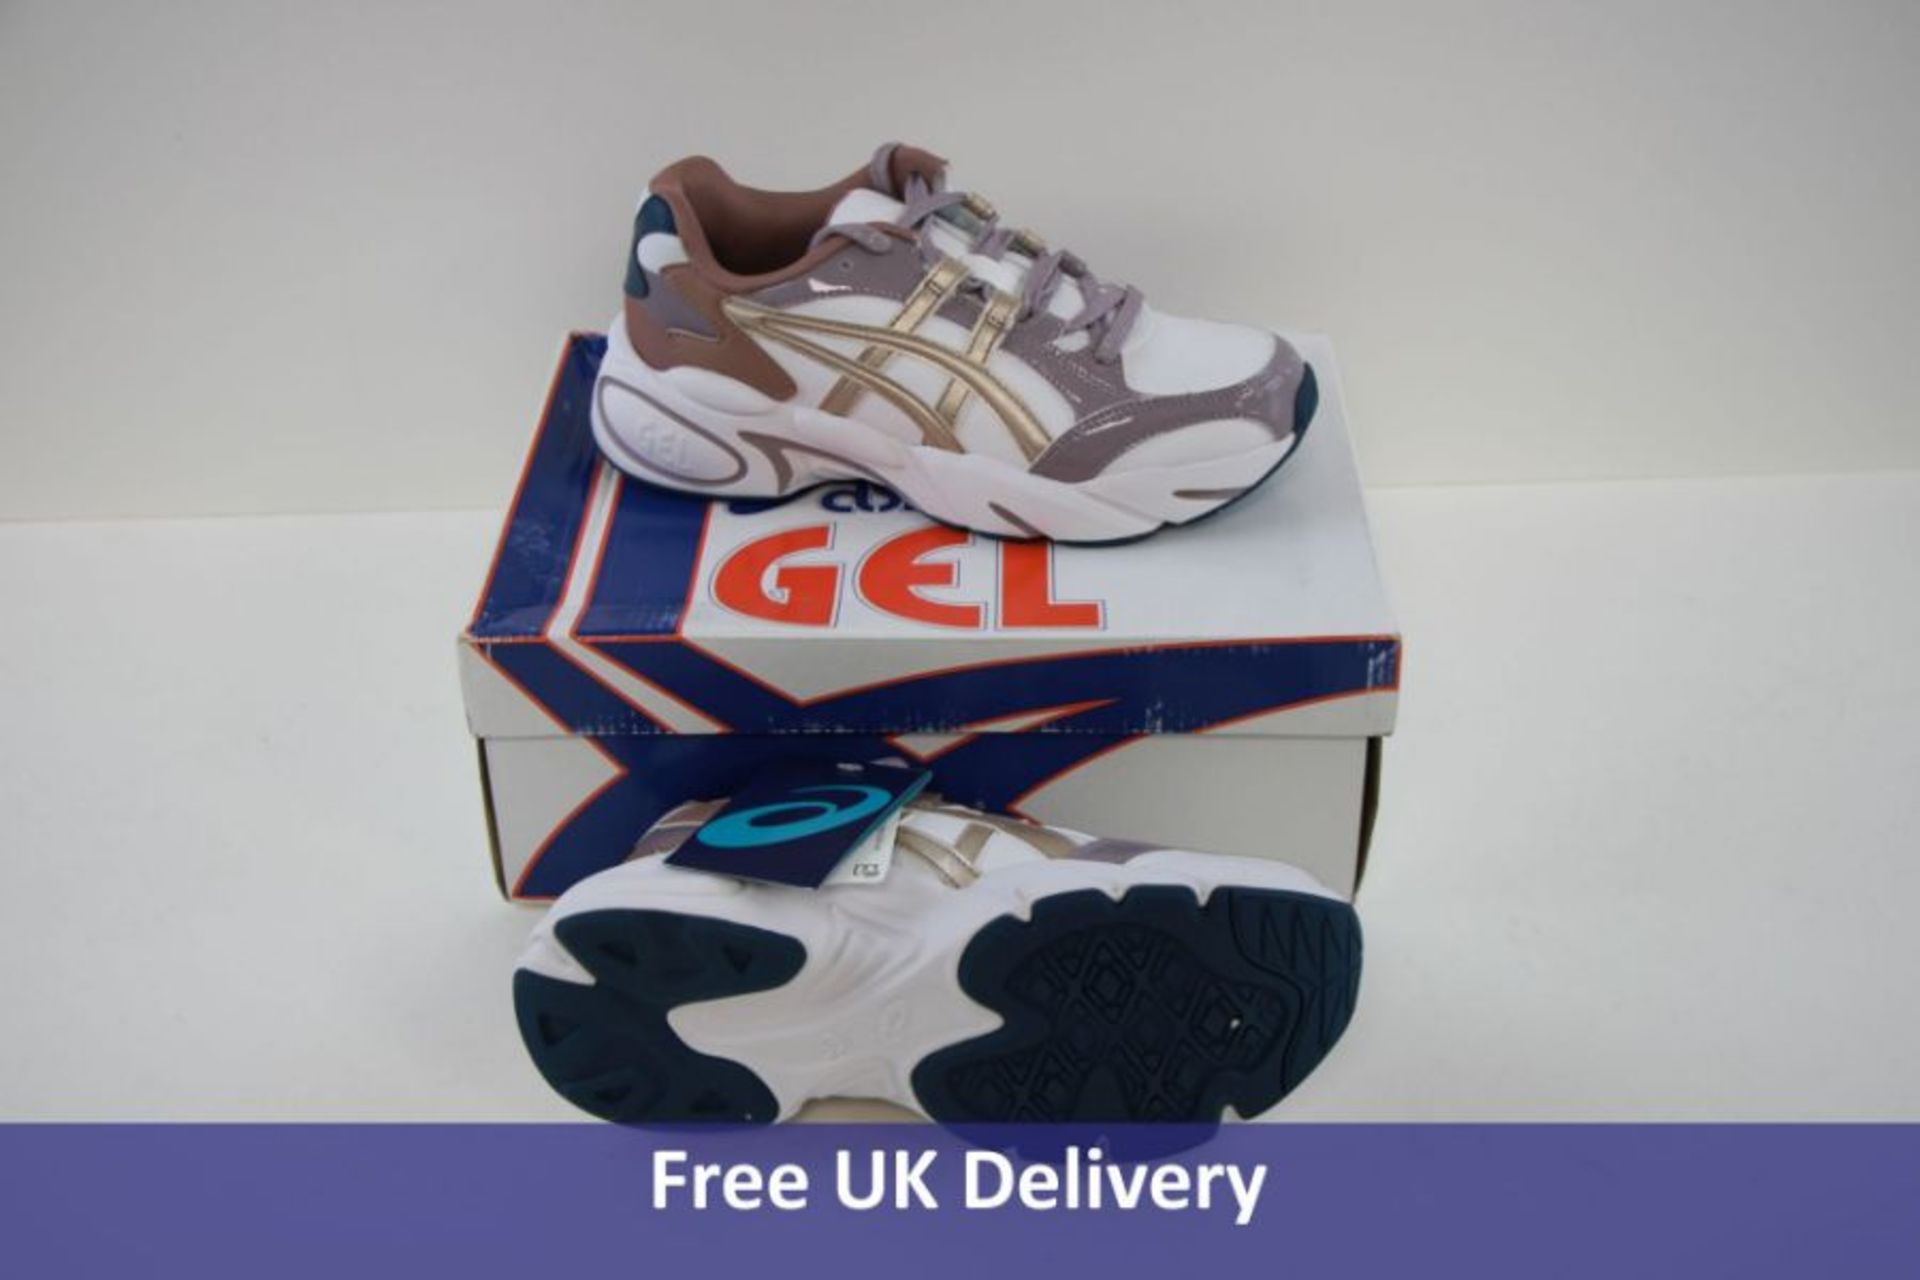 Asics Women's Gel BND Trainers, White and Frosted Almond, UK 5